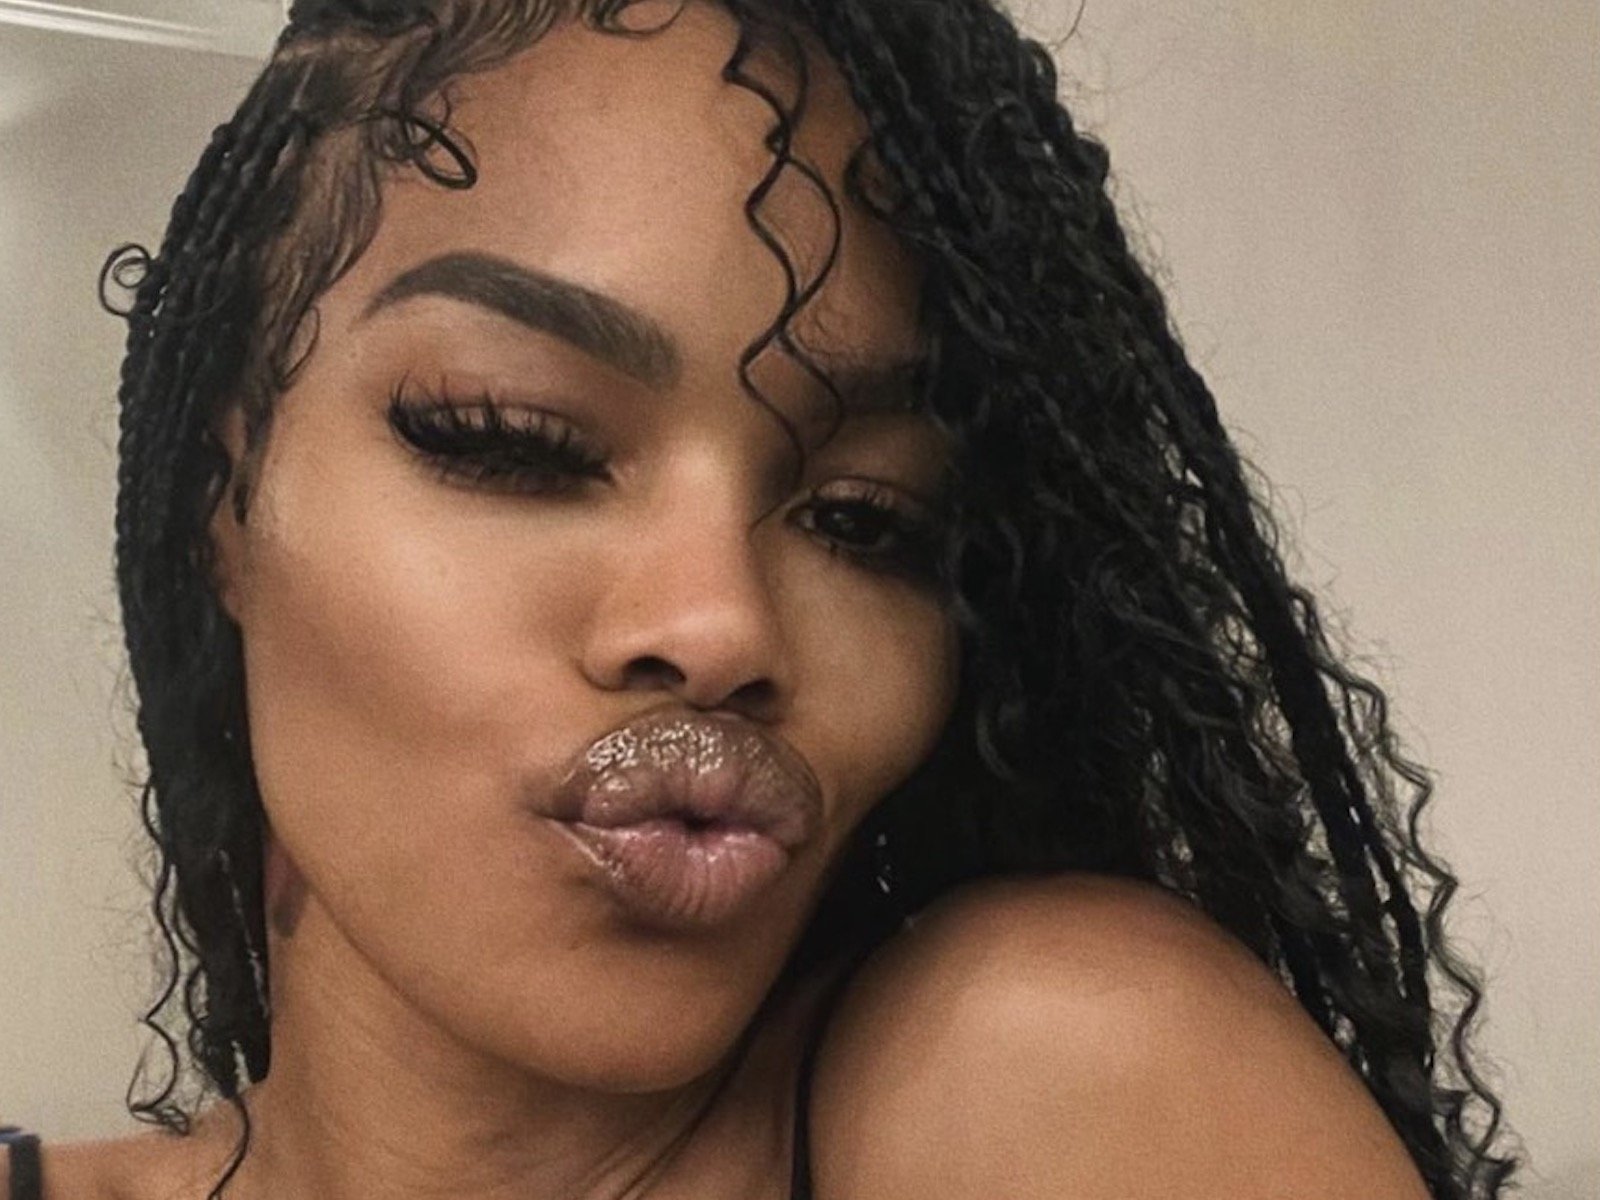 Teyana Taylor The Harlem Beauty Blowing Kisses Will Warm Your Entire Body — Attack The Culture 